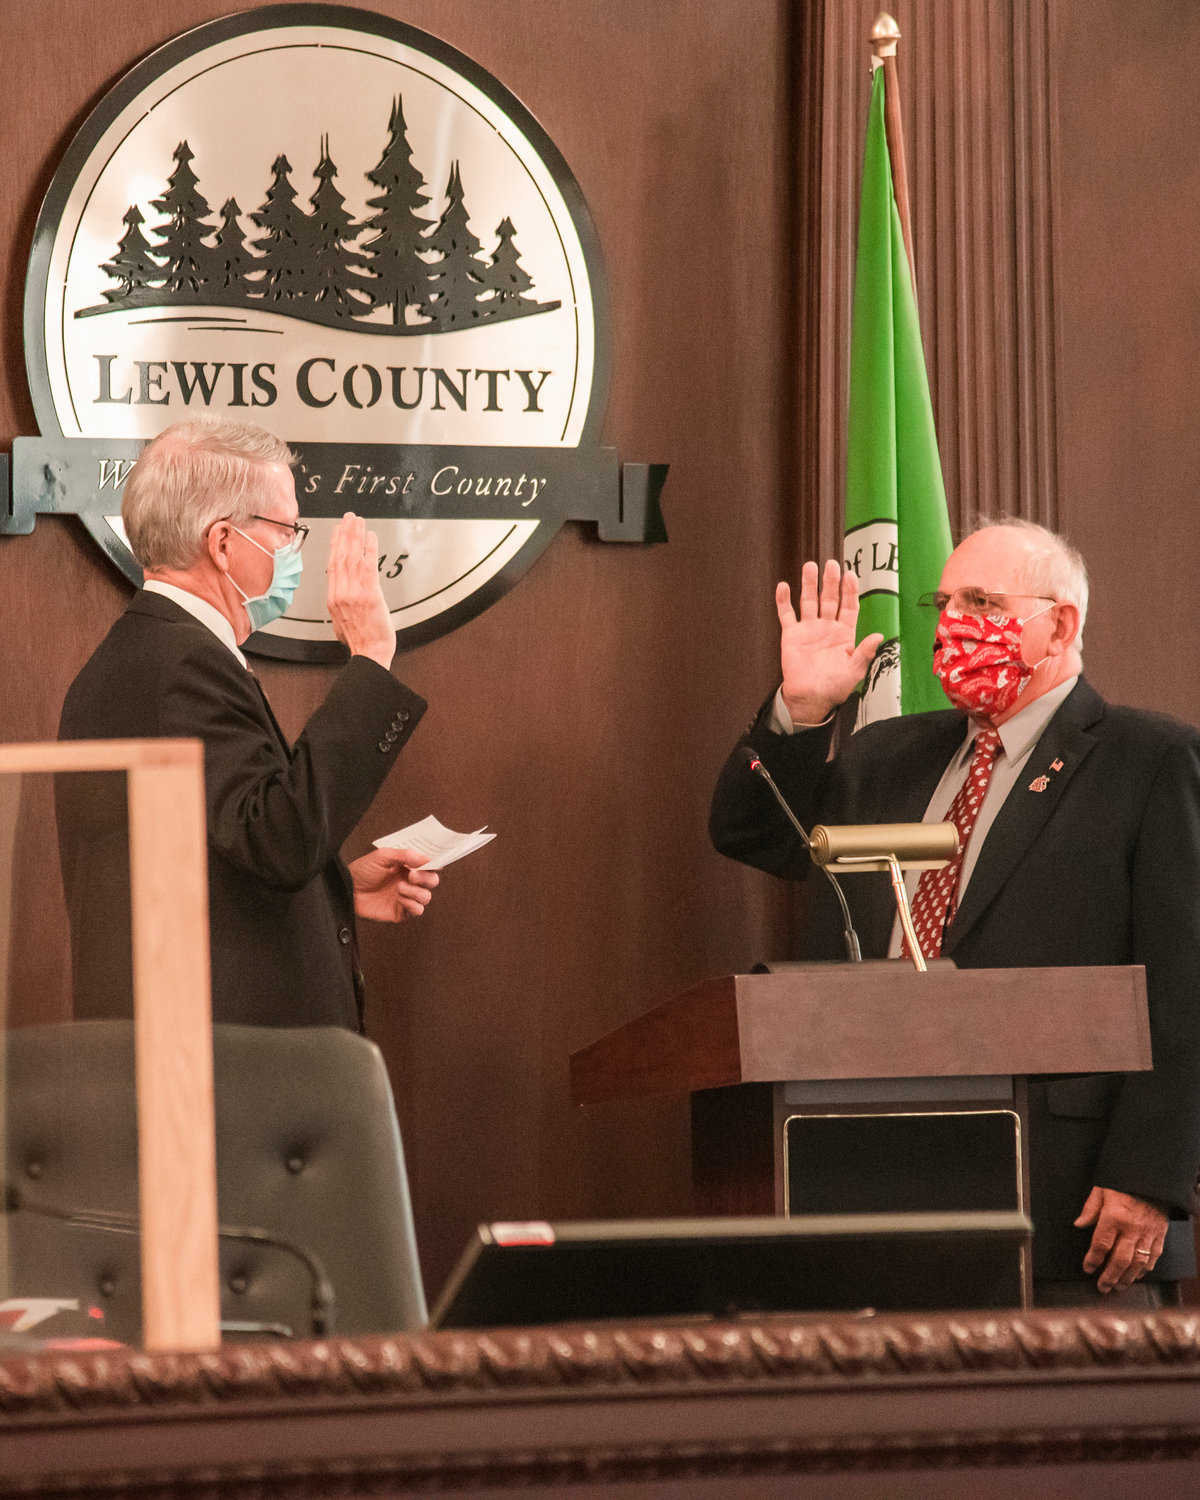 Lee Grose, right, and Judge James Lawler raise their right hands during a swearing in ceremony Wednesday morning in the commission chambers.